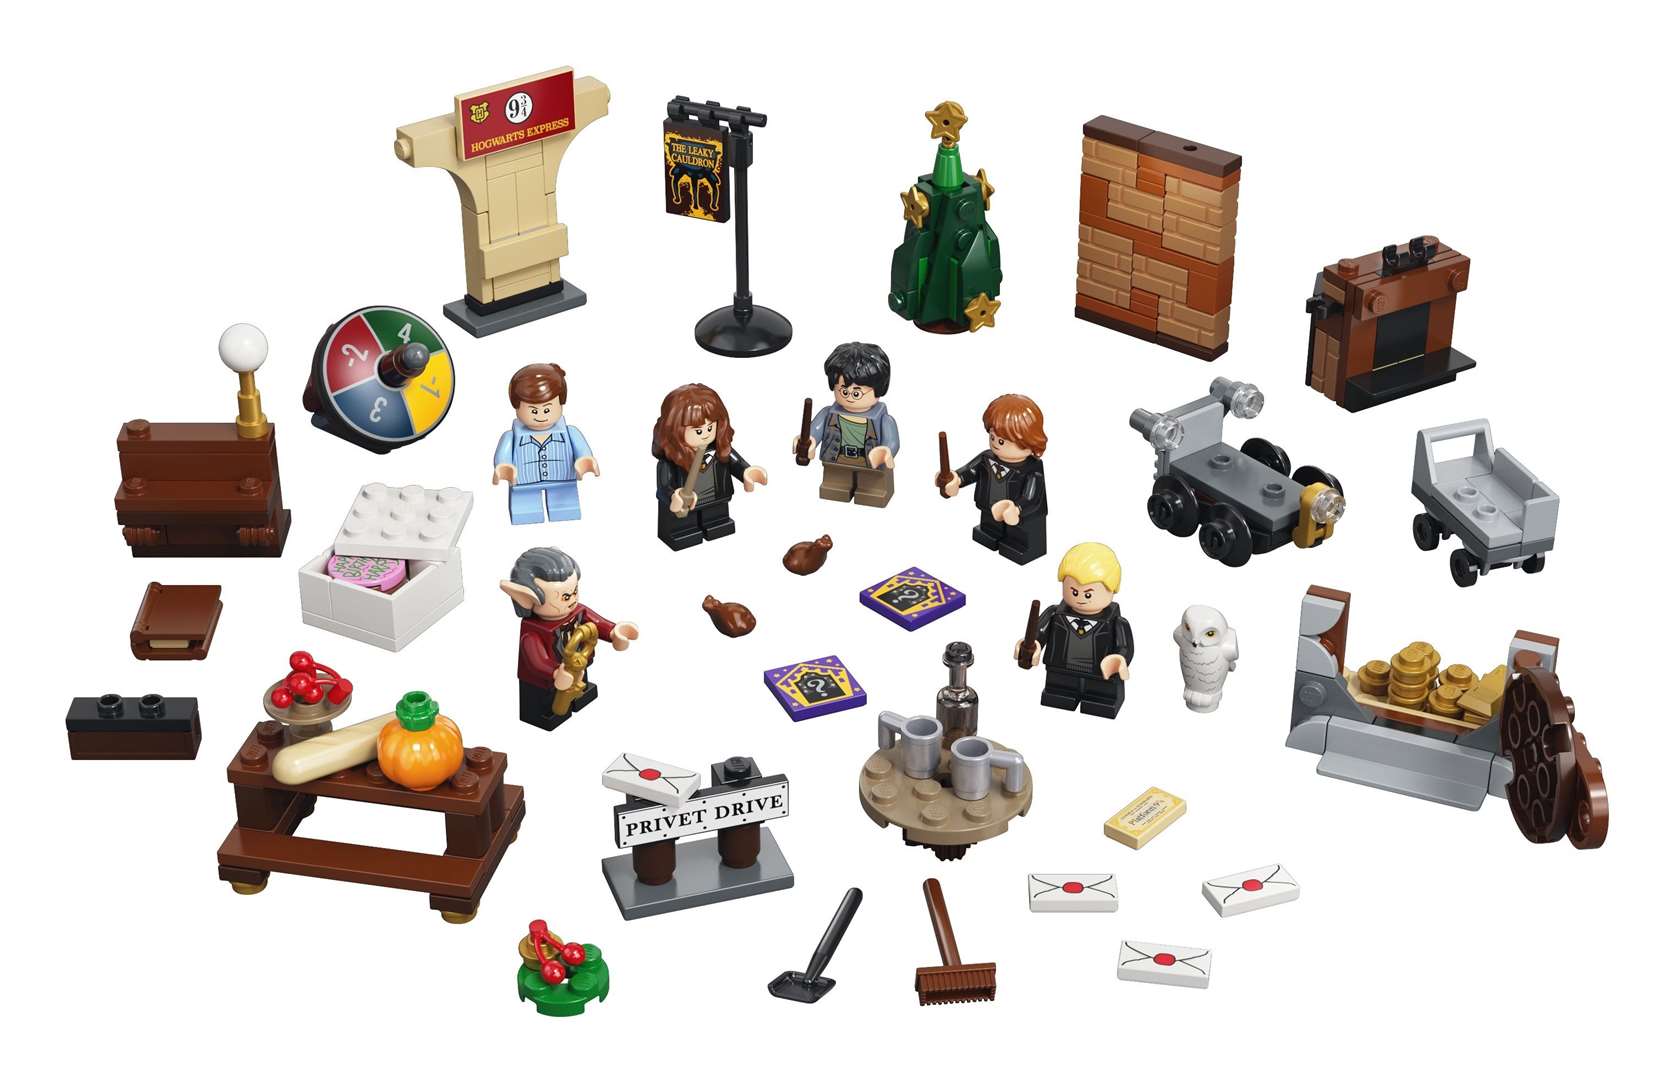 There are lots of Harry Potter figures to collect in the 2021 calendar